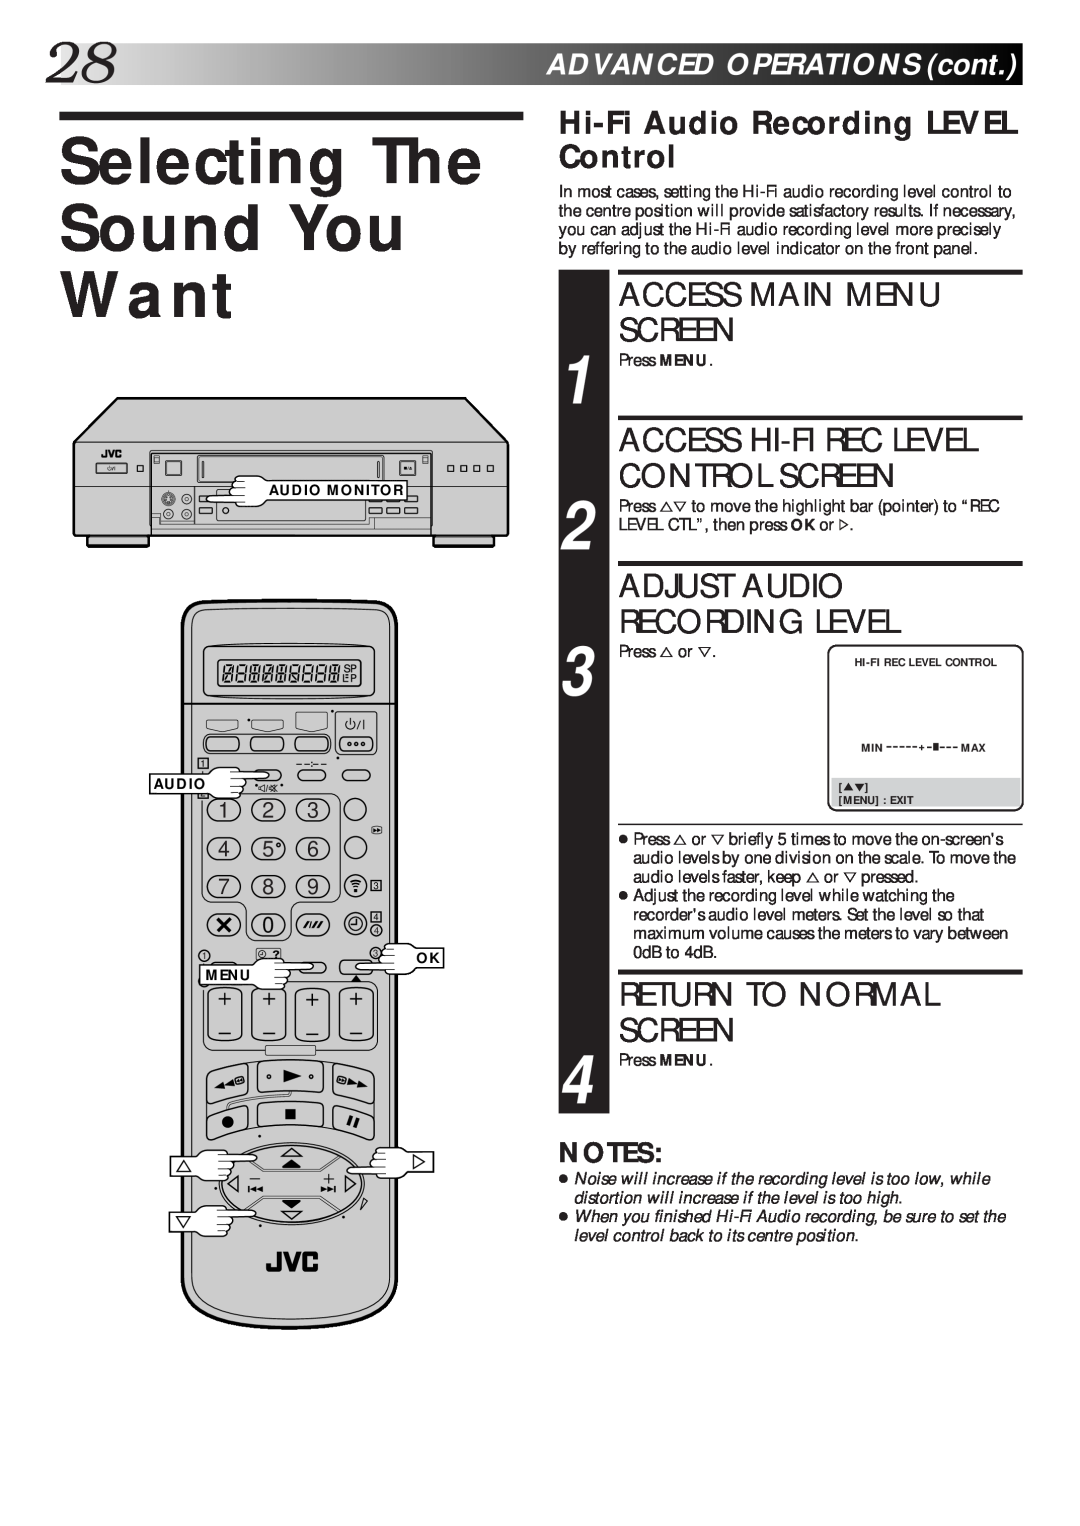 JVC HR-S9600EK Selecting The Sound You Want, Control Screen, Adjust Audio, Recording Level, Return To Normal Screen 